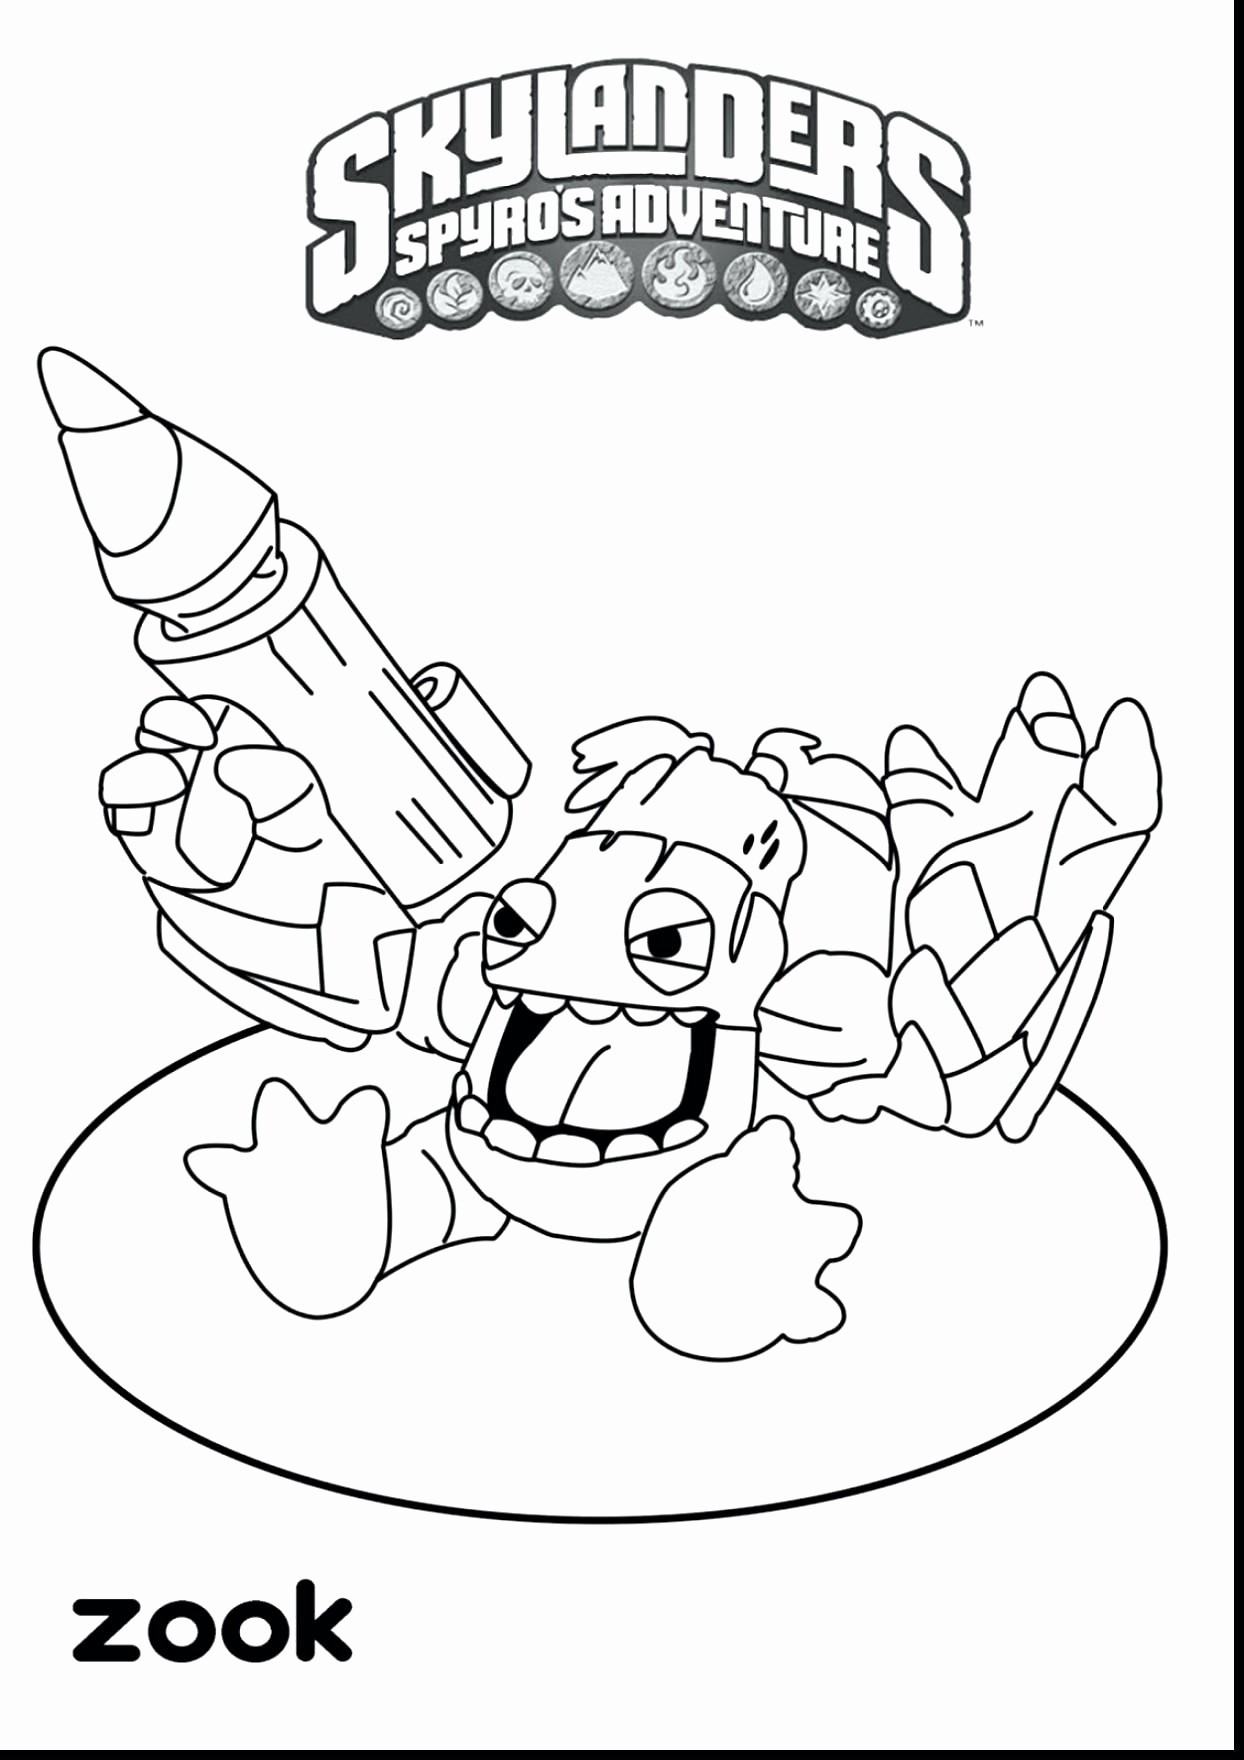 Dinosaurs King Coloring Pages